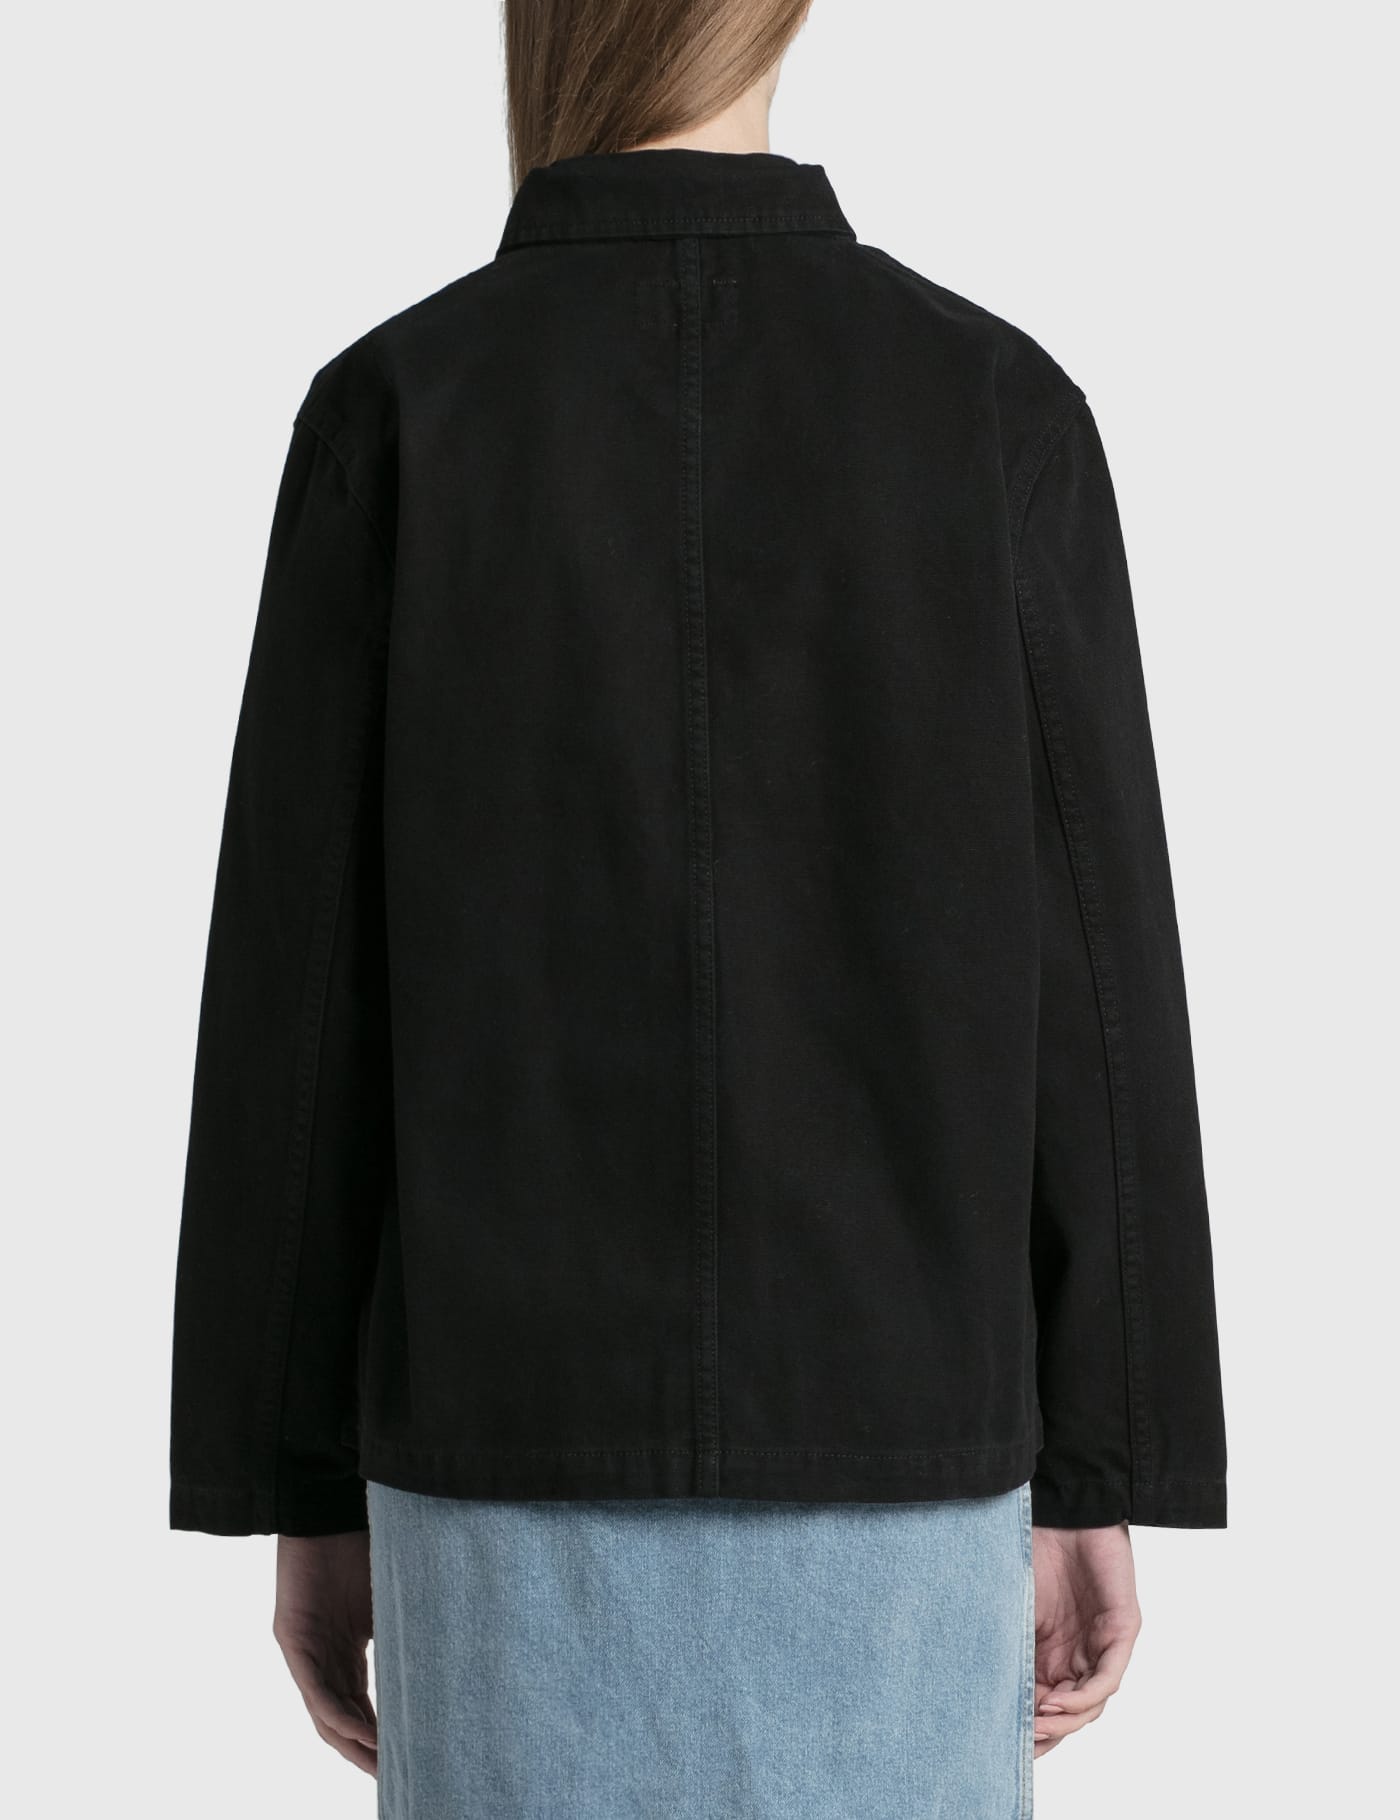 Stüssy - Canvas Chore Jacket | HBX - Globally Curated Fashion and 